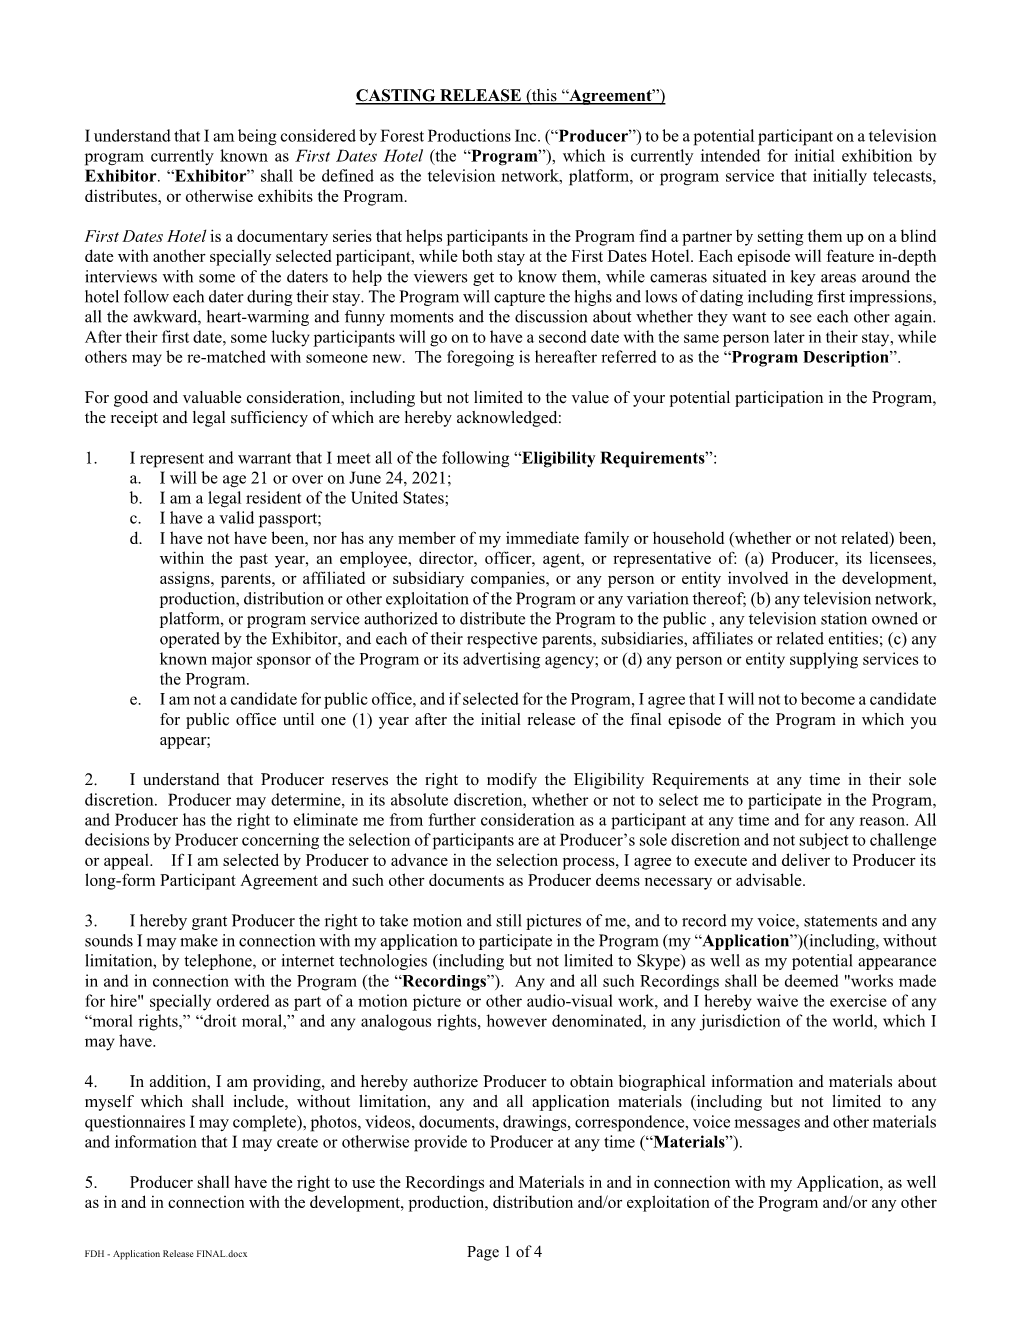 Page 1 of 4 CASTING RELEASE (This “Agreement